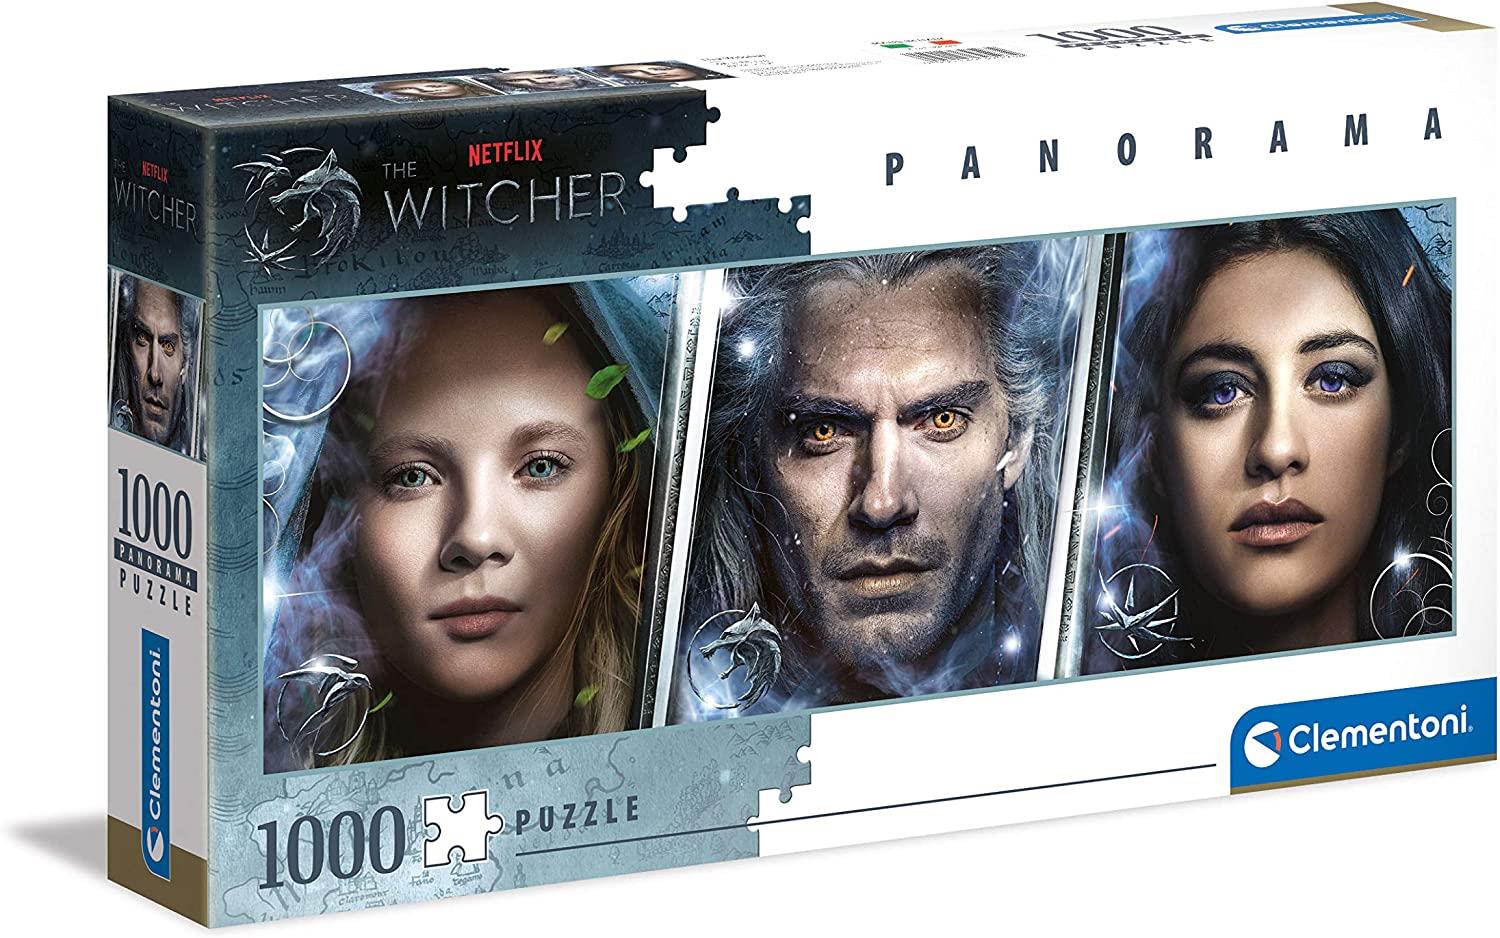 Clementoni The Witcher Panorama Jigsaw Puzzle (1000 Pieces)